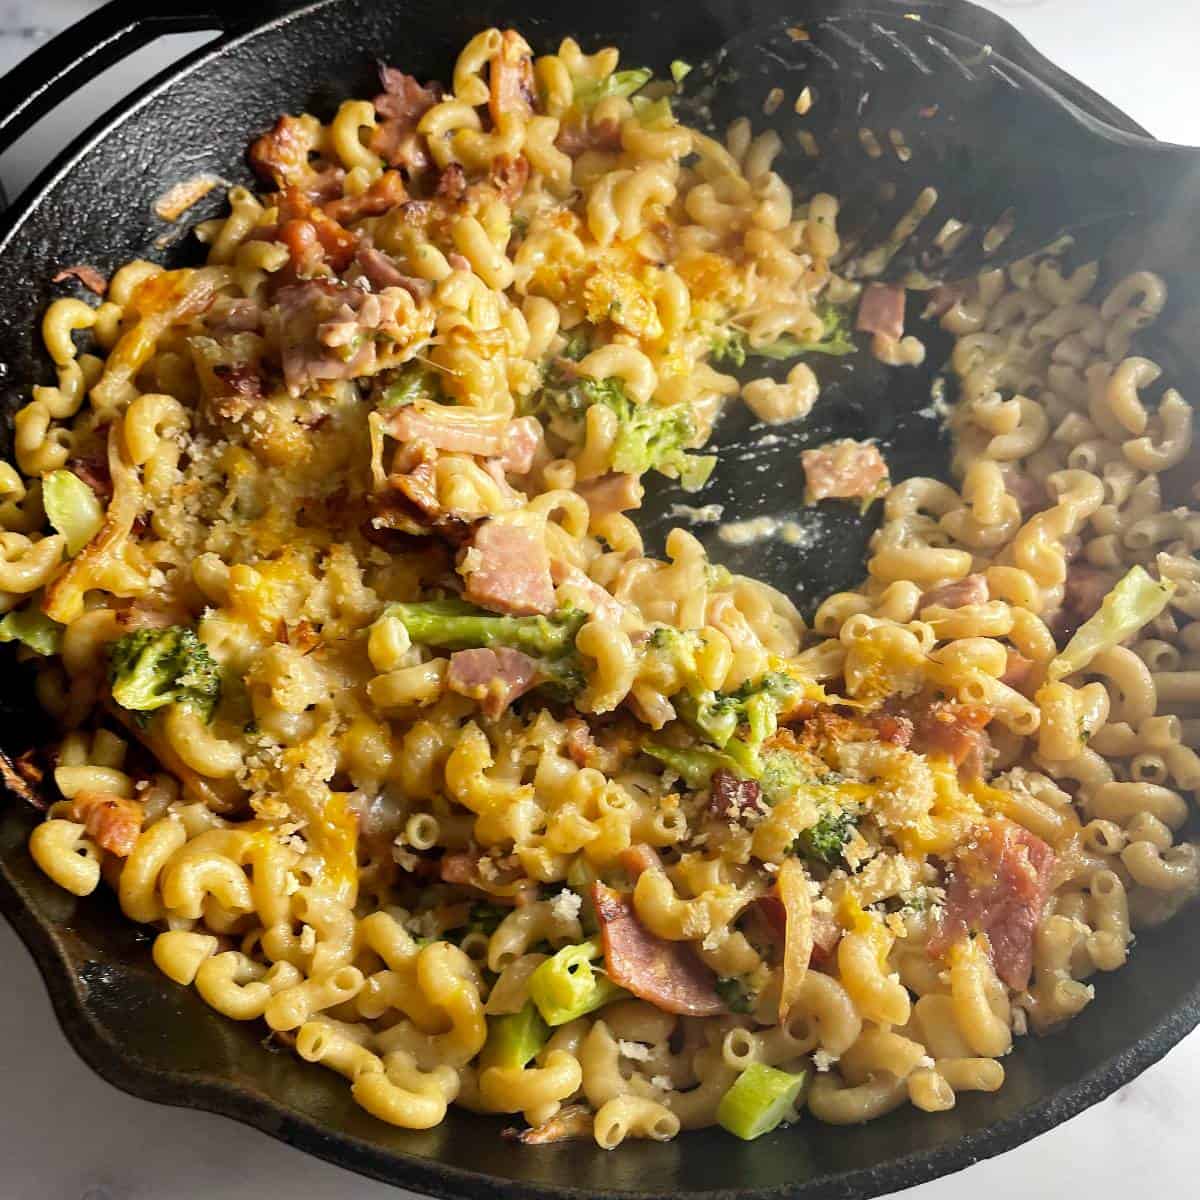 ham, cheese and pasta baked in a large black skillet. photo shows a spoon scooping out a serving.